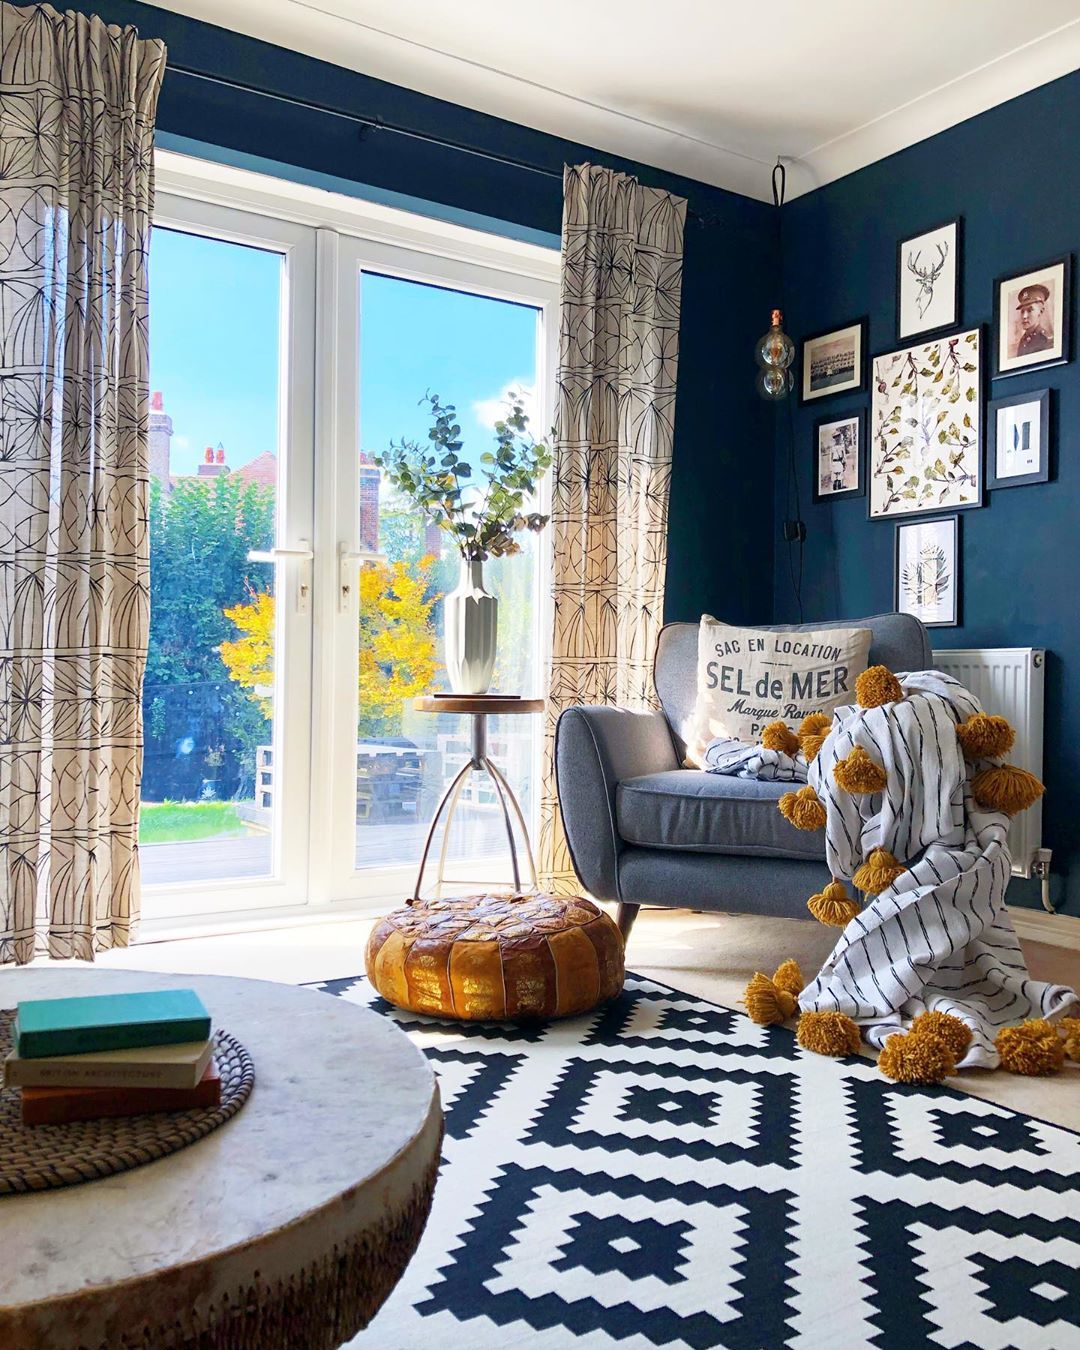 living room with blue walls and white and blue area rug with lots of natural light photo by Instagram user @nest_twenty_eight